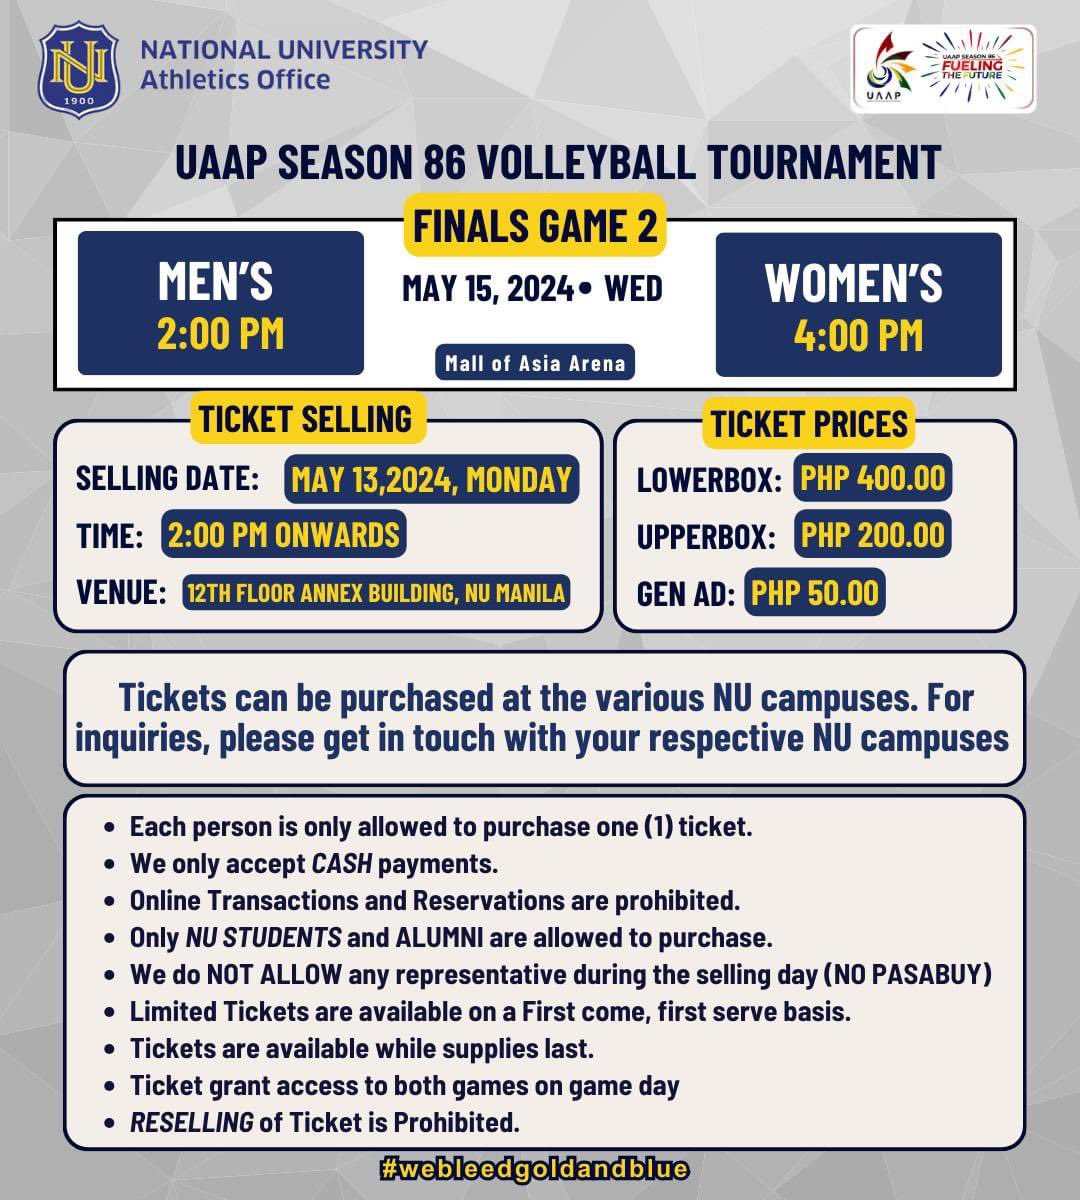 TICKET UPDATE: Per NU Athletics Office, ticket selling will start at 2pm today. Tickets are also available in other campuses.

#GoBulldogs #NULetsGo #UAAPSeason86